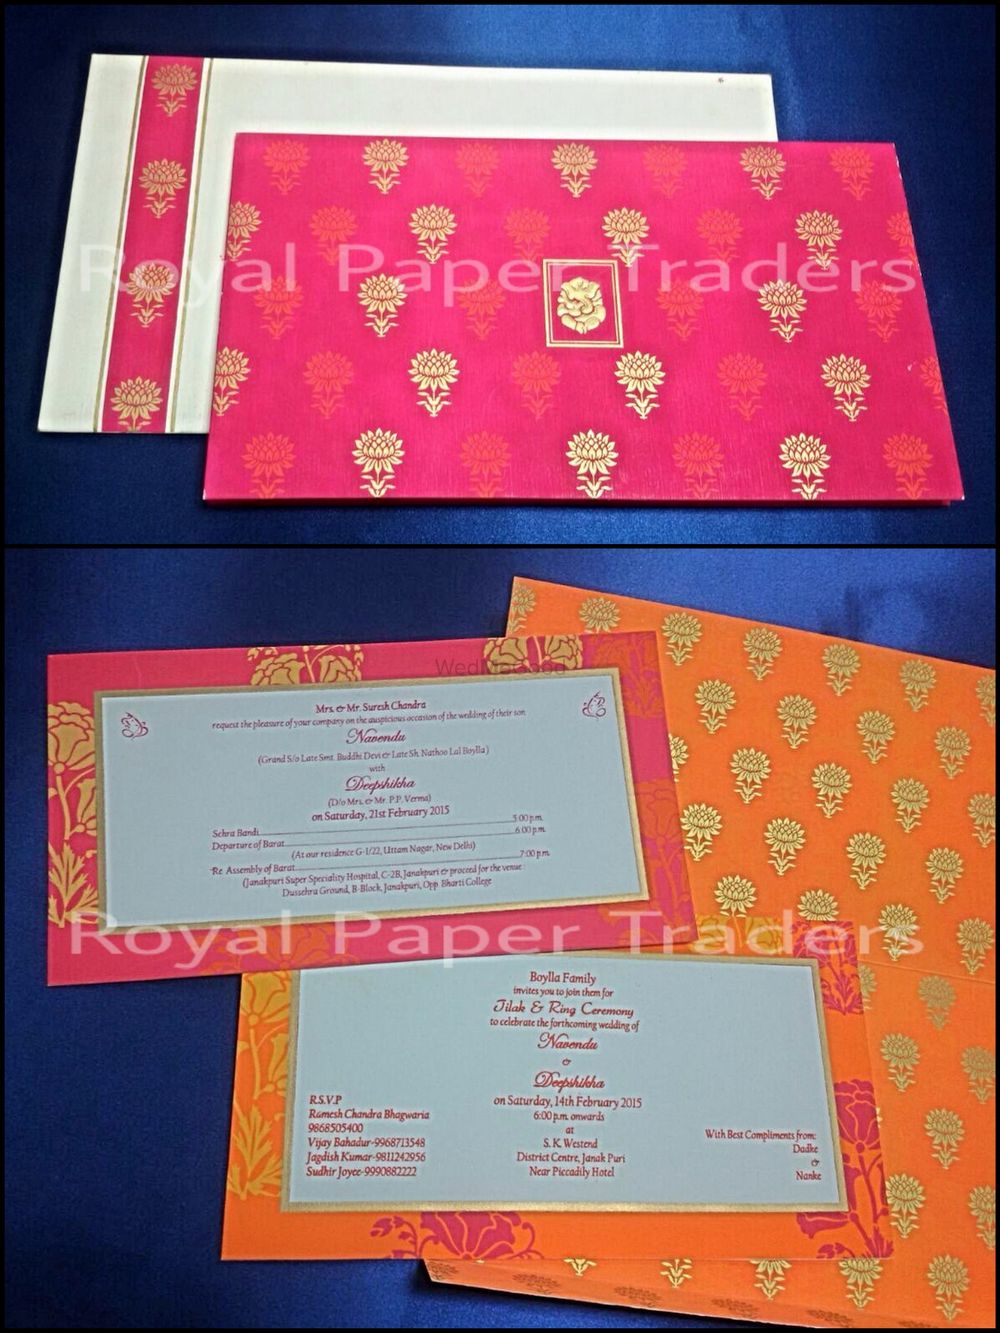 Photo of Royal Papers Traders